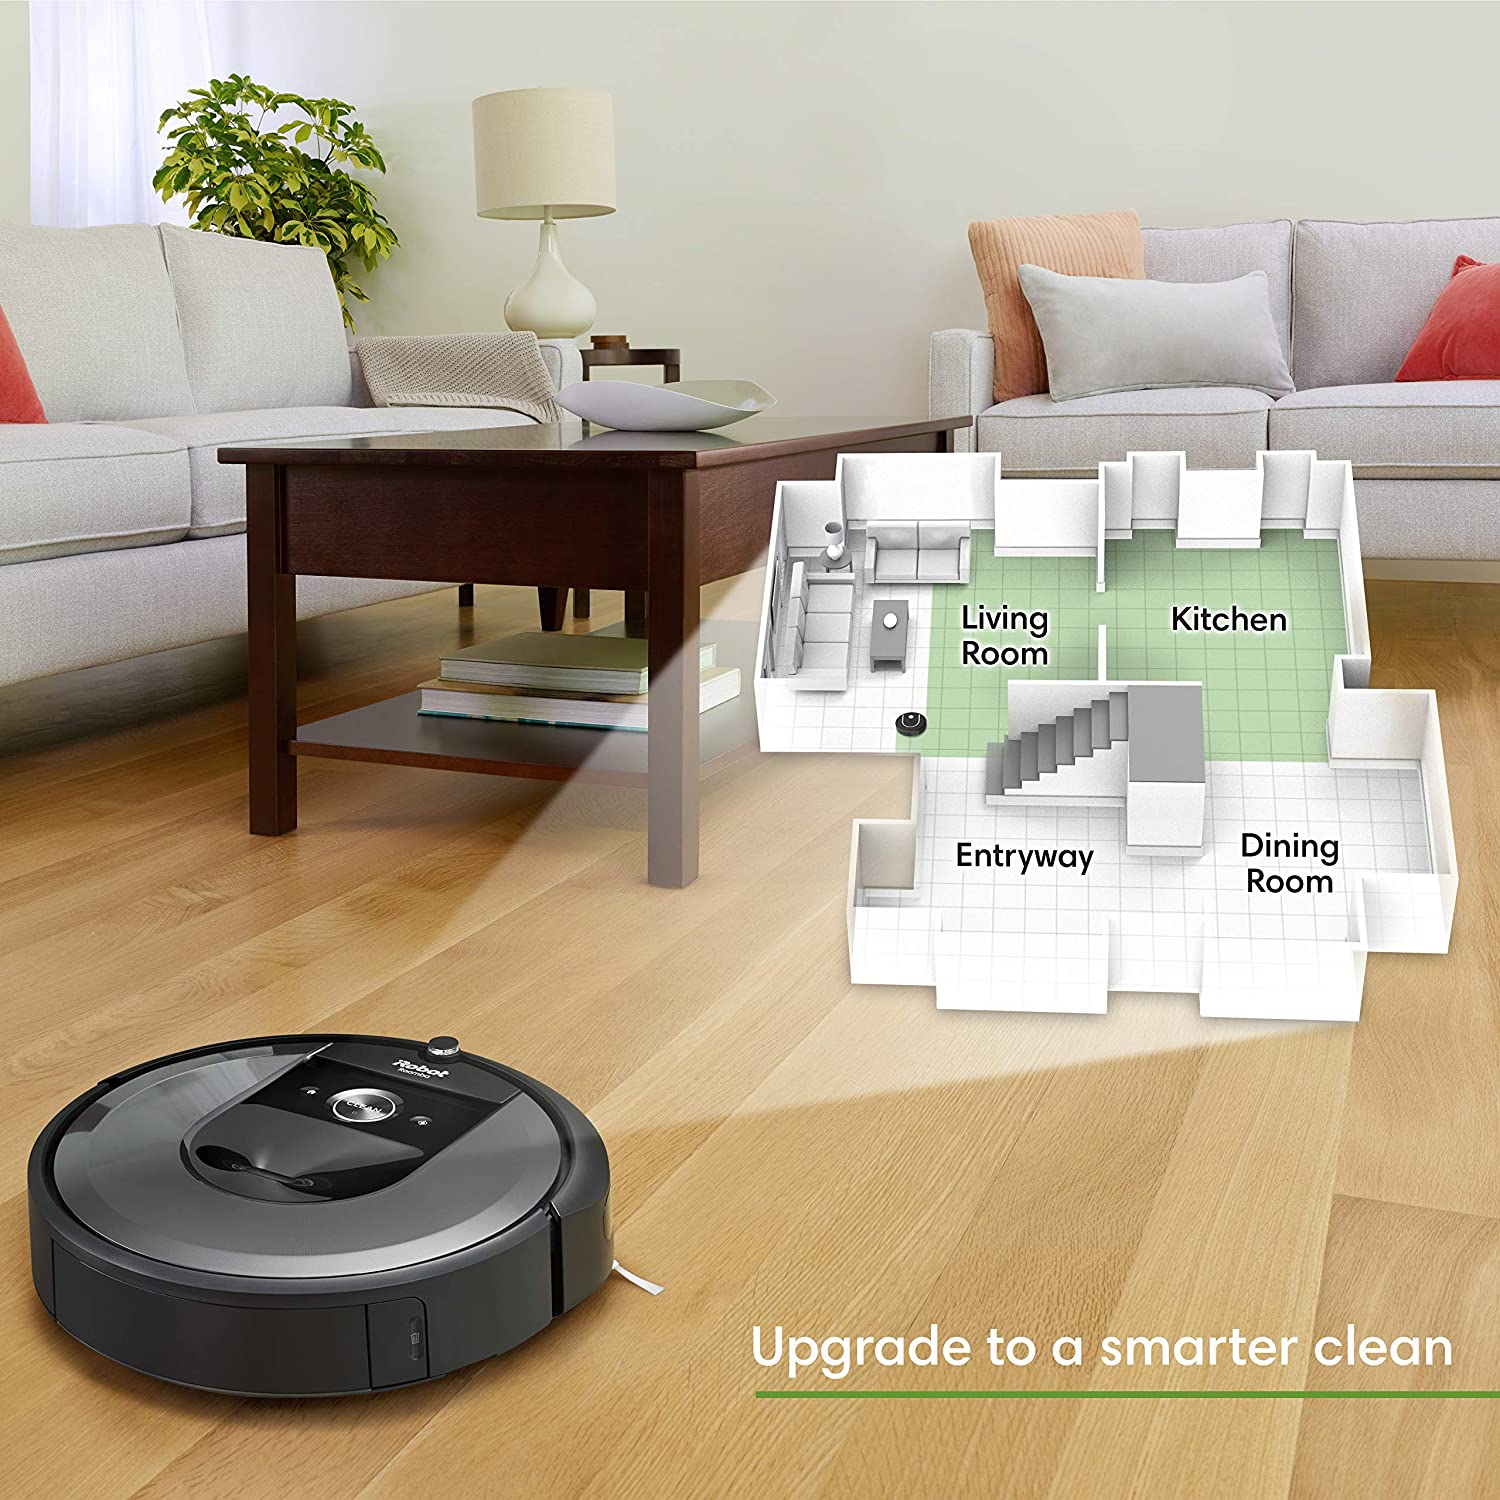 iRobot Roomba i6+ (6550) Robot Vacuum with Automatic Dirt Disposal-Empties Itself, Wi-Fi Connected, Works with Alexa, Carpets, + Smart Mapping Upgrade - Clean & Schedule by Room - image 3 of 3